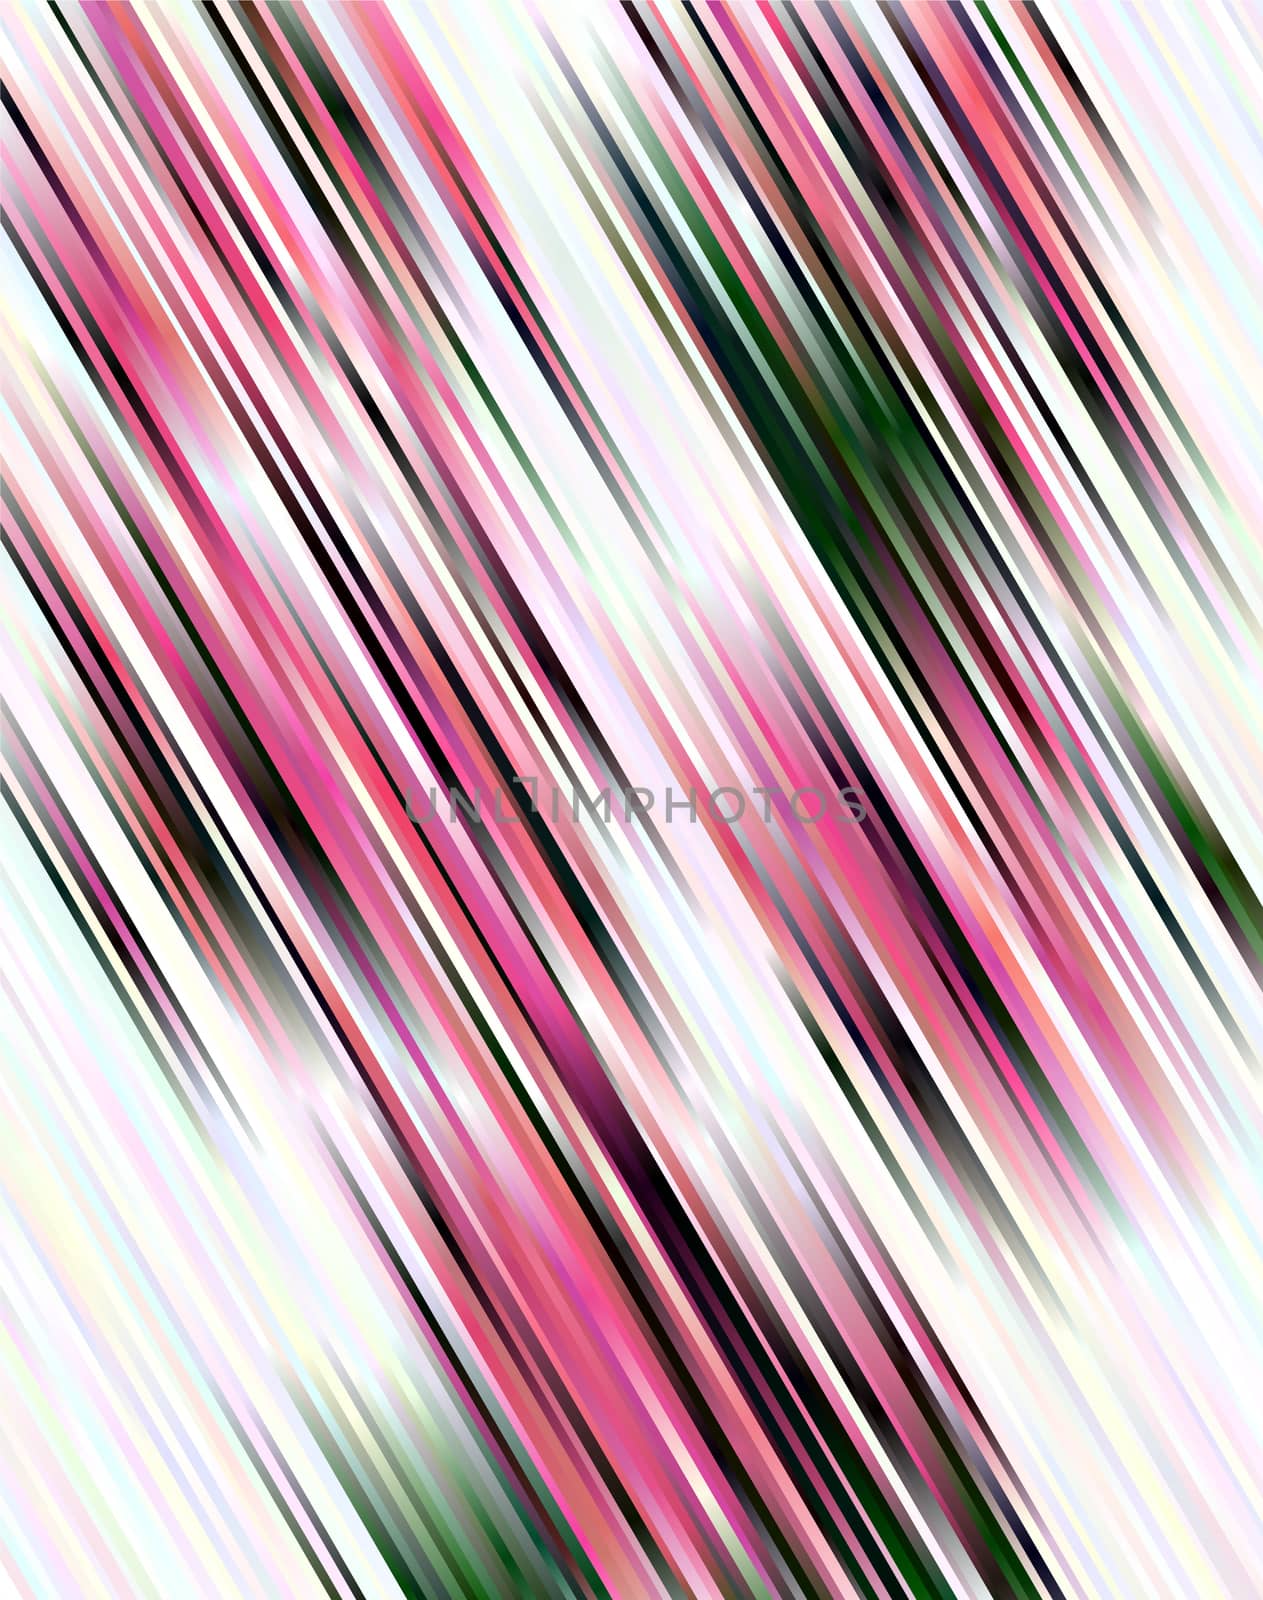 Abstract magenta, black and white diagonal stripes background